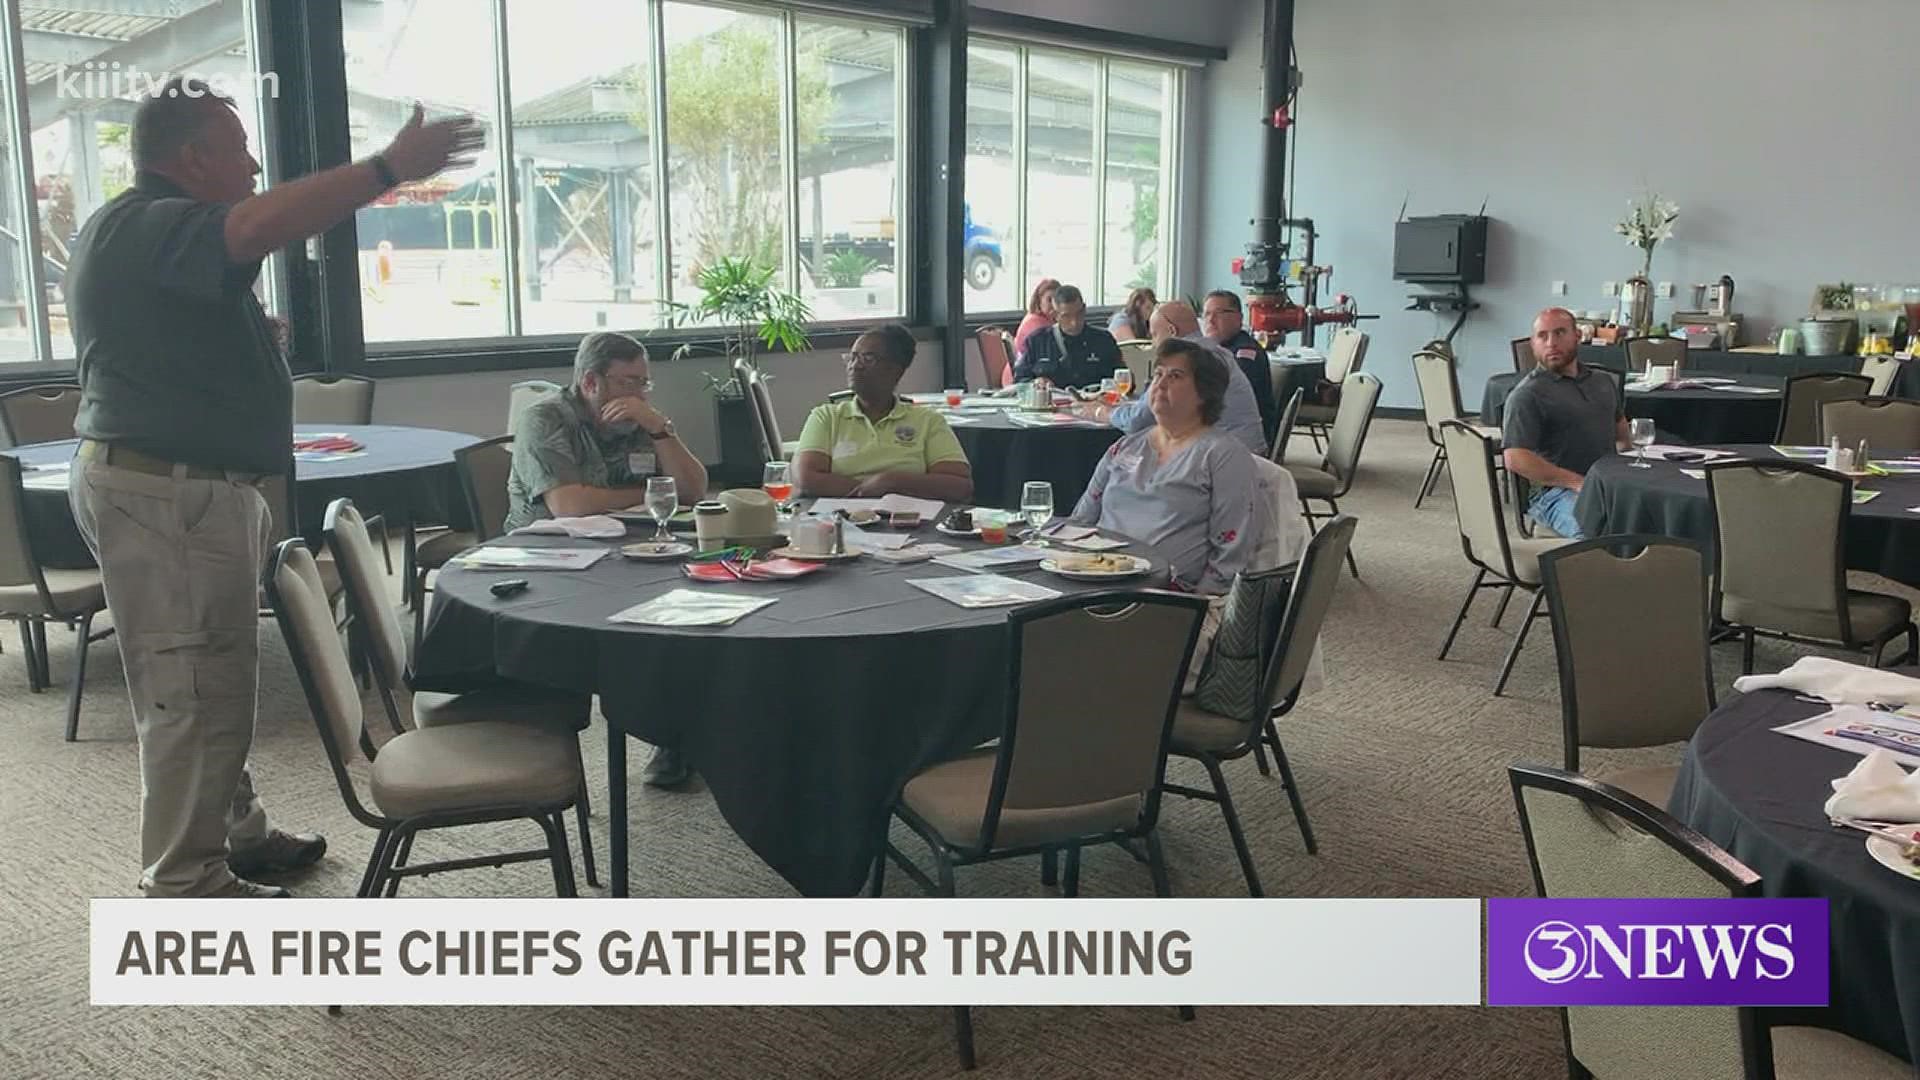 On Tuesday, many leaders underwent training to try and bring the latest and best practices to their departments.